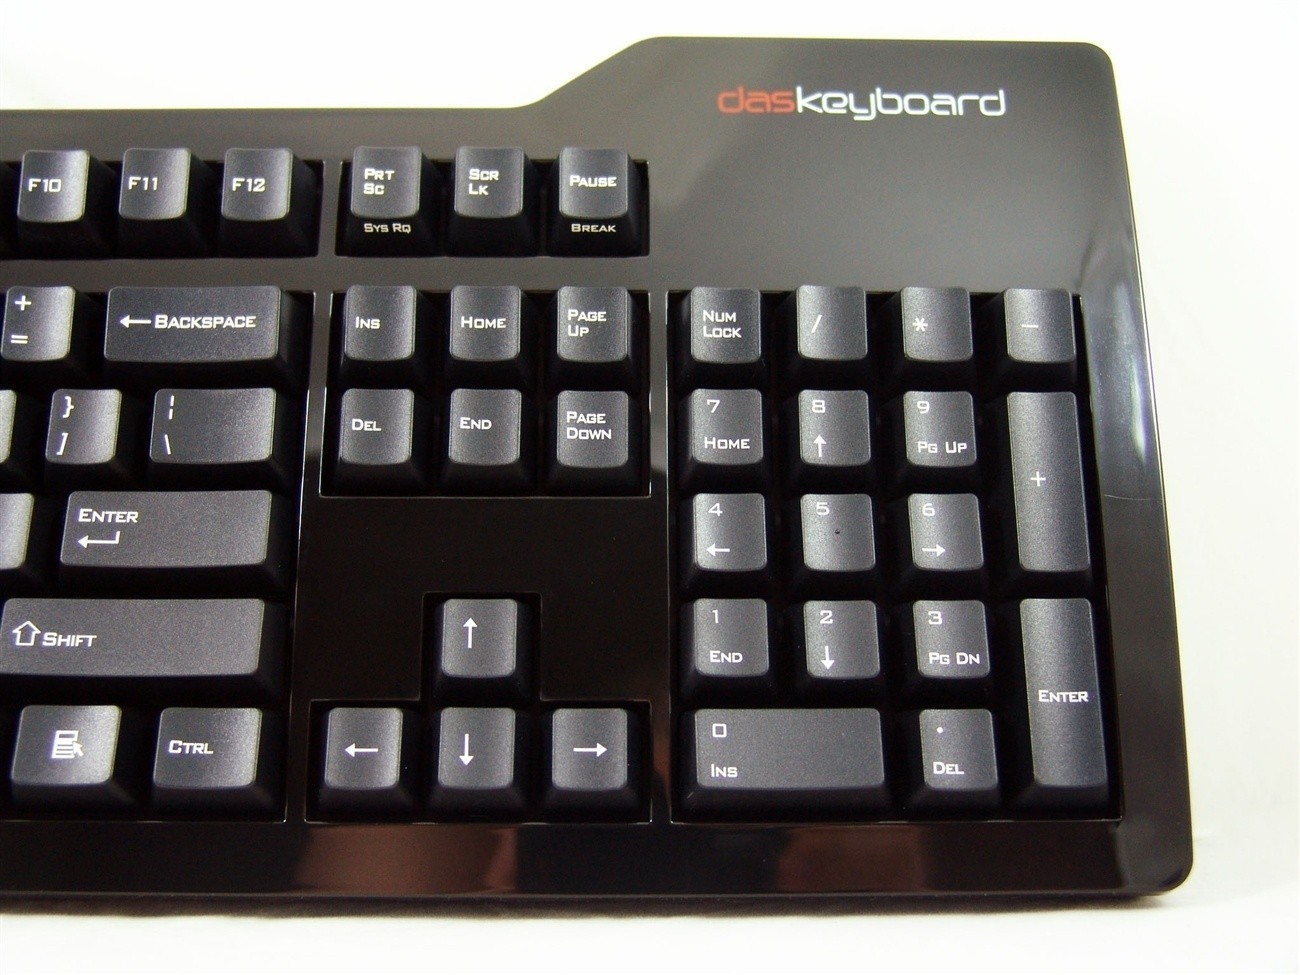 das keyboard model s professional for mac review